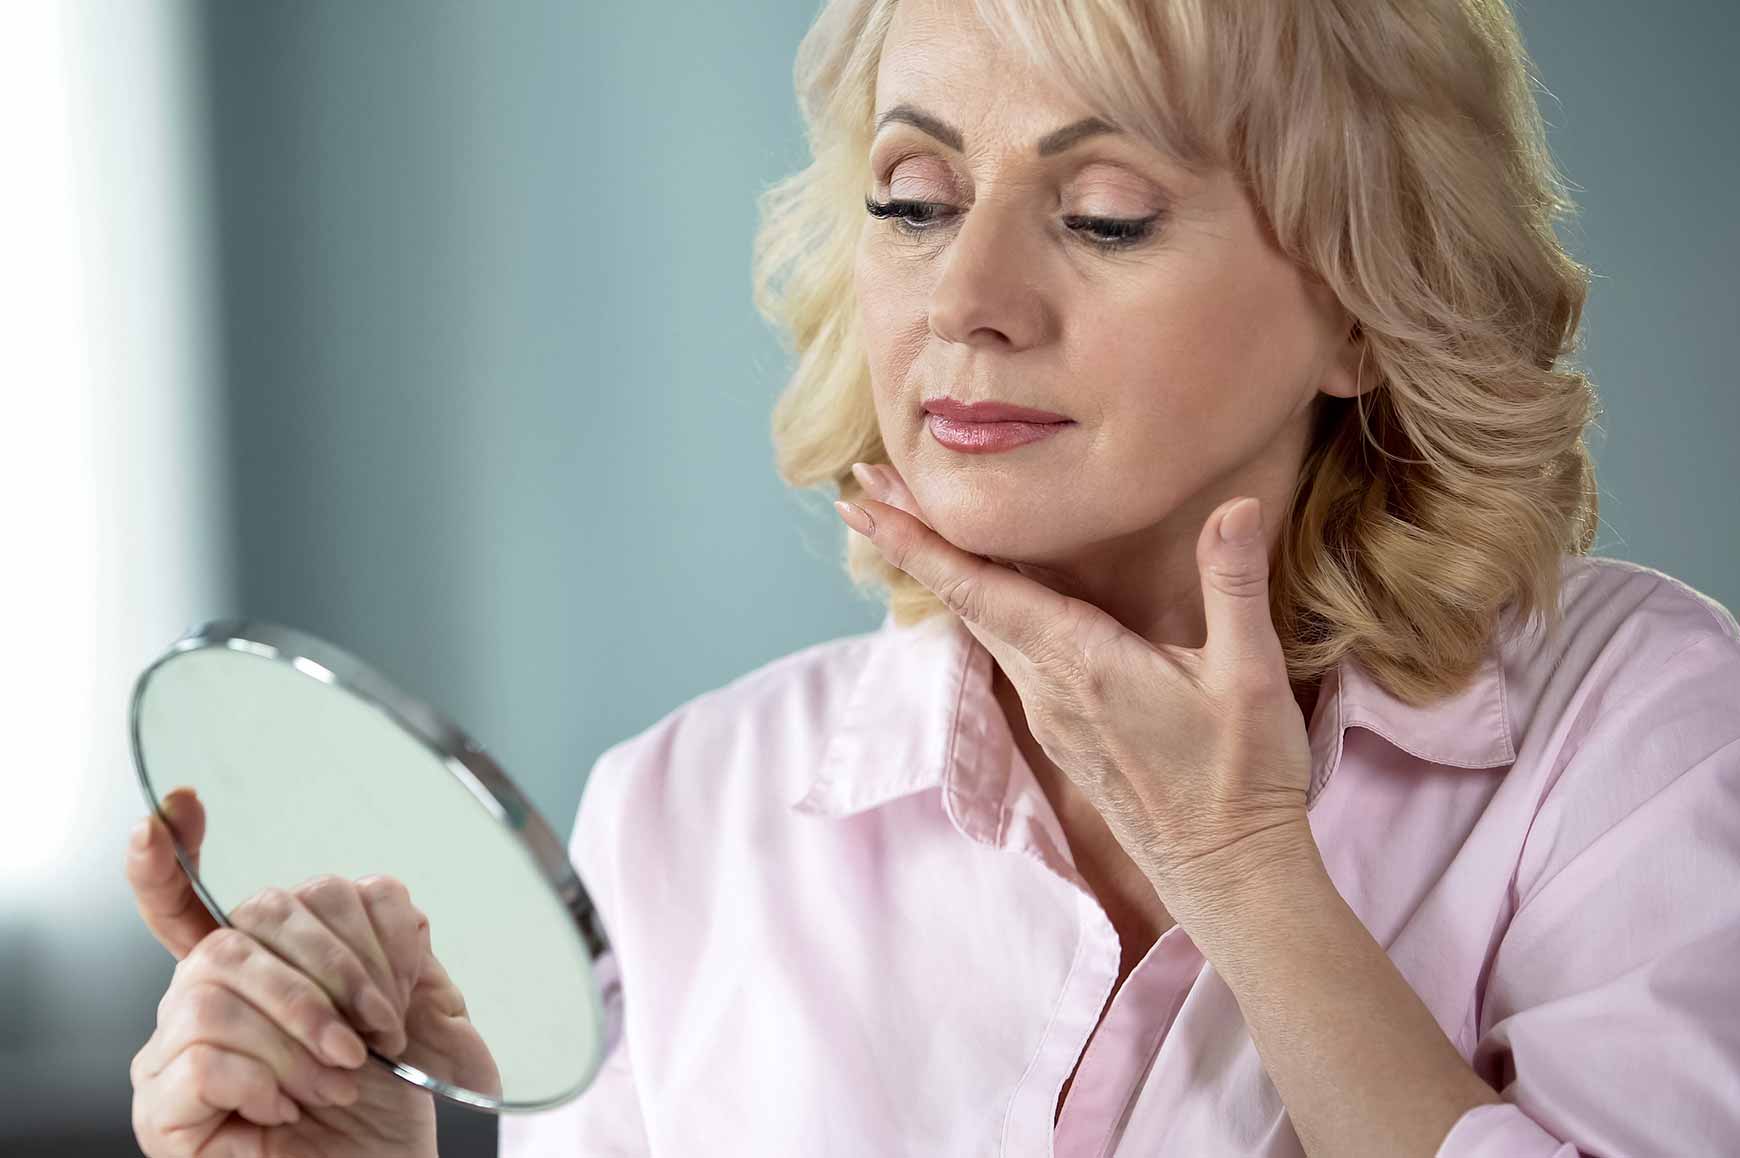 Two facial fillers used in the treatment of aging affected areas include Juvederm and Teoxane.